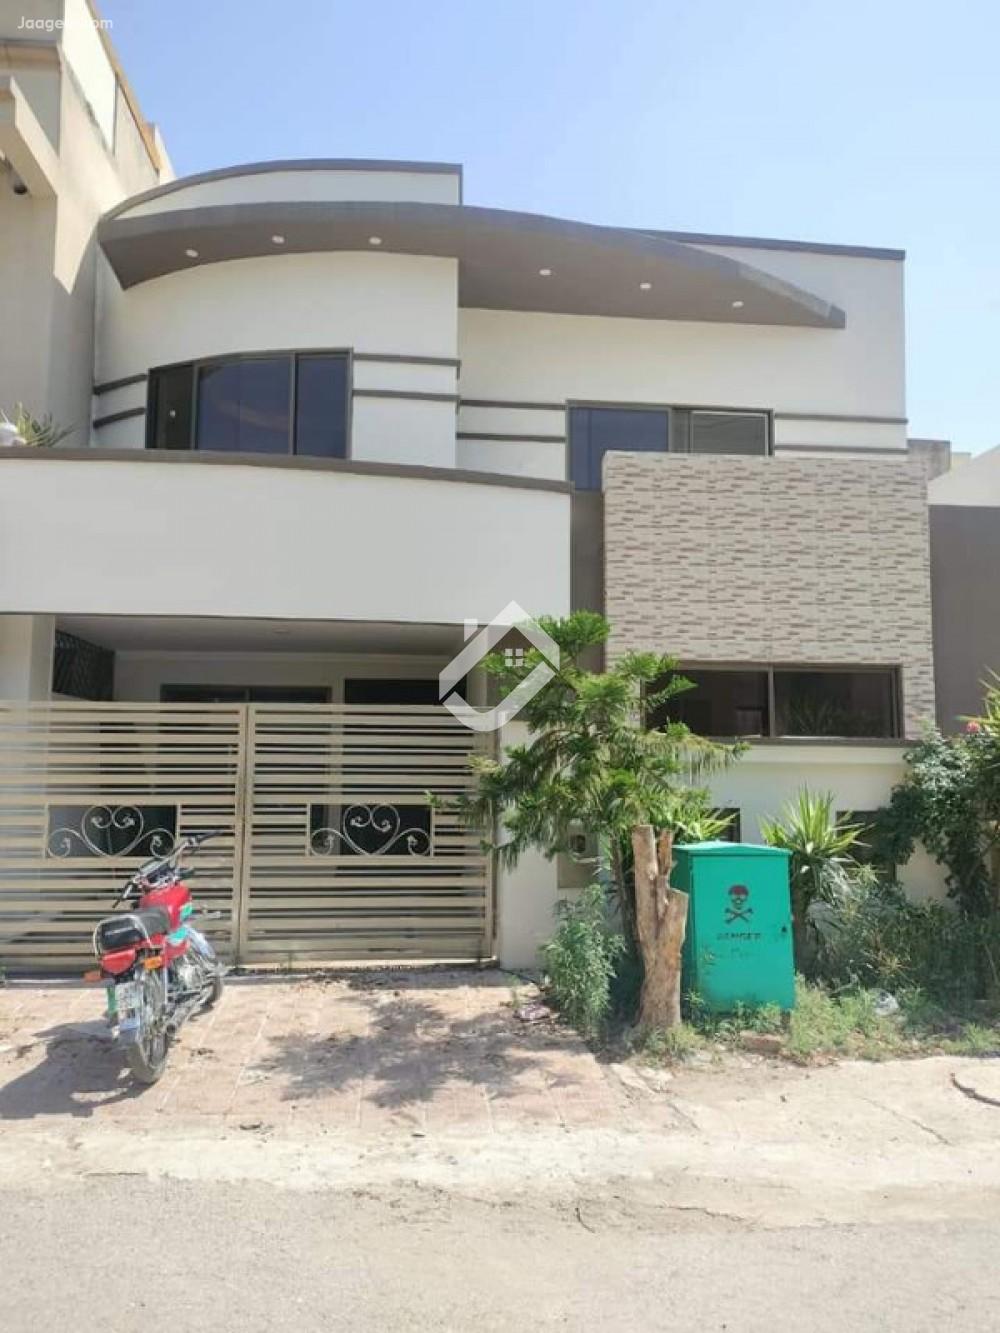 7 Marla House For Sale In Bahria Town Phase-8  Sector F1 in Bahria Town Phase-8, Rawalpindi